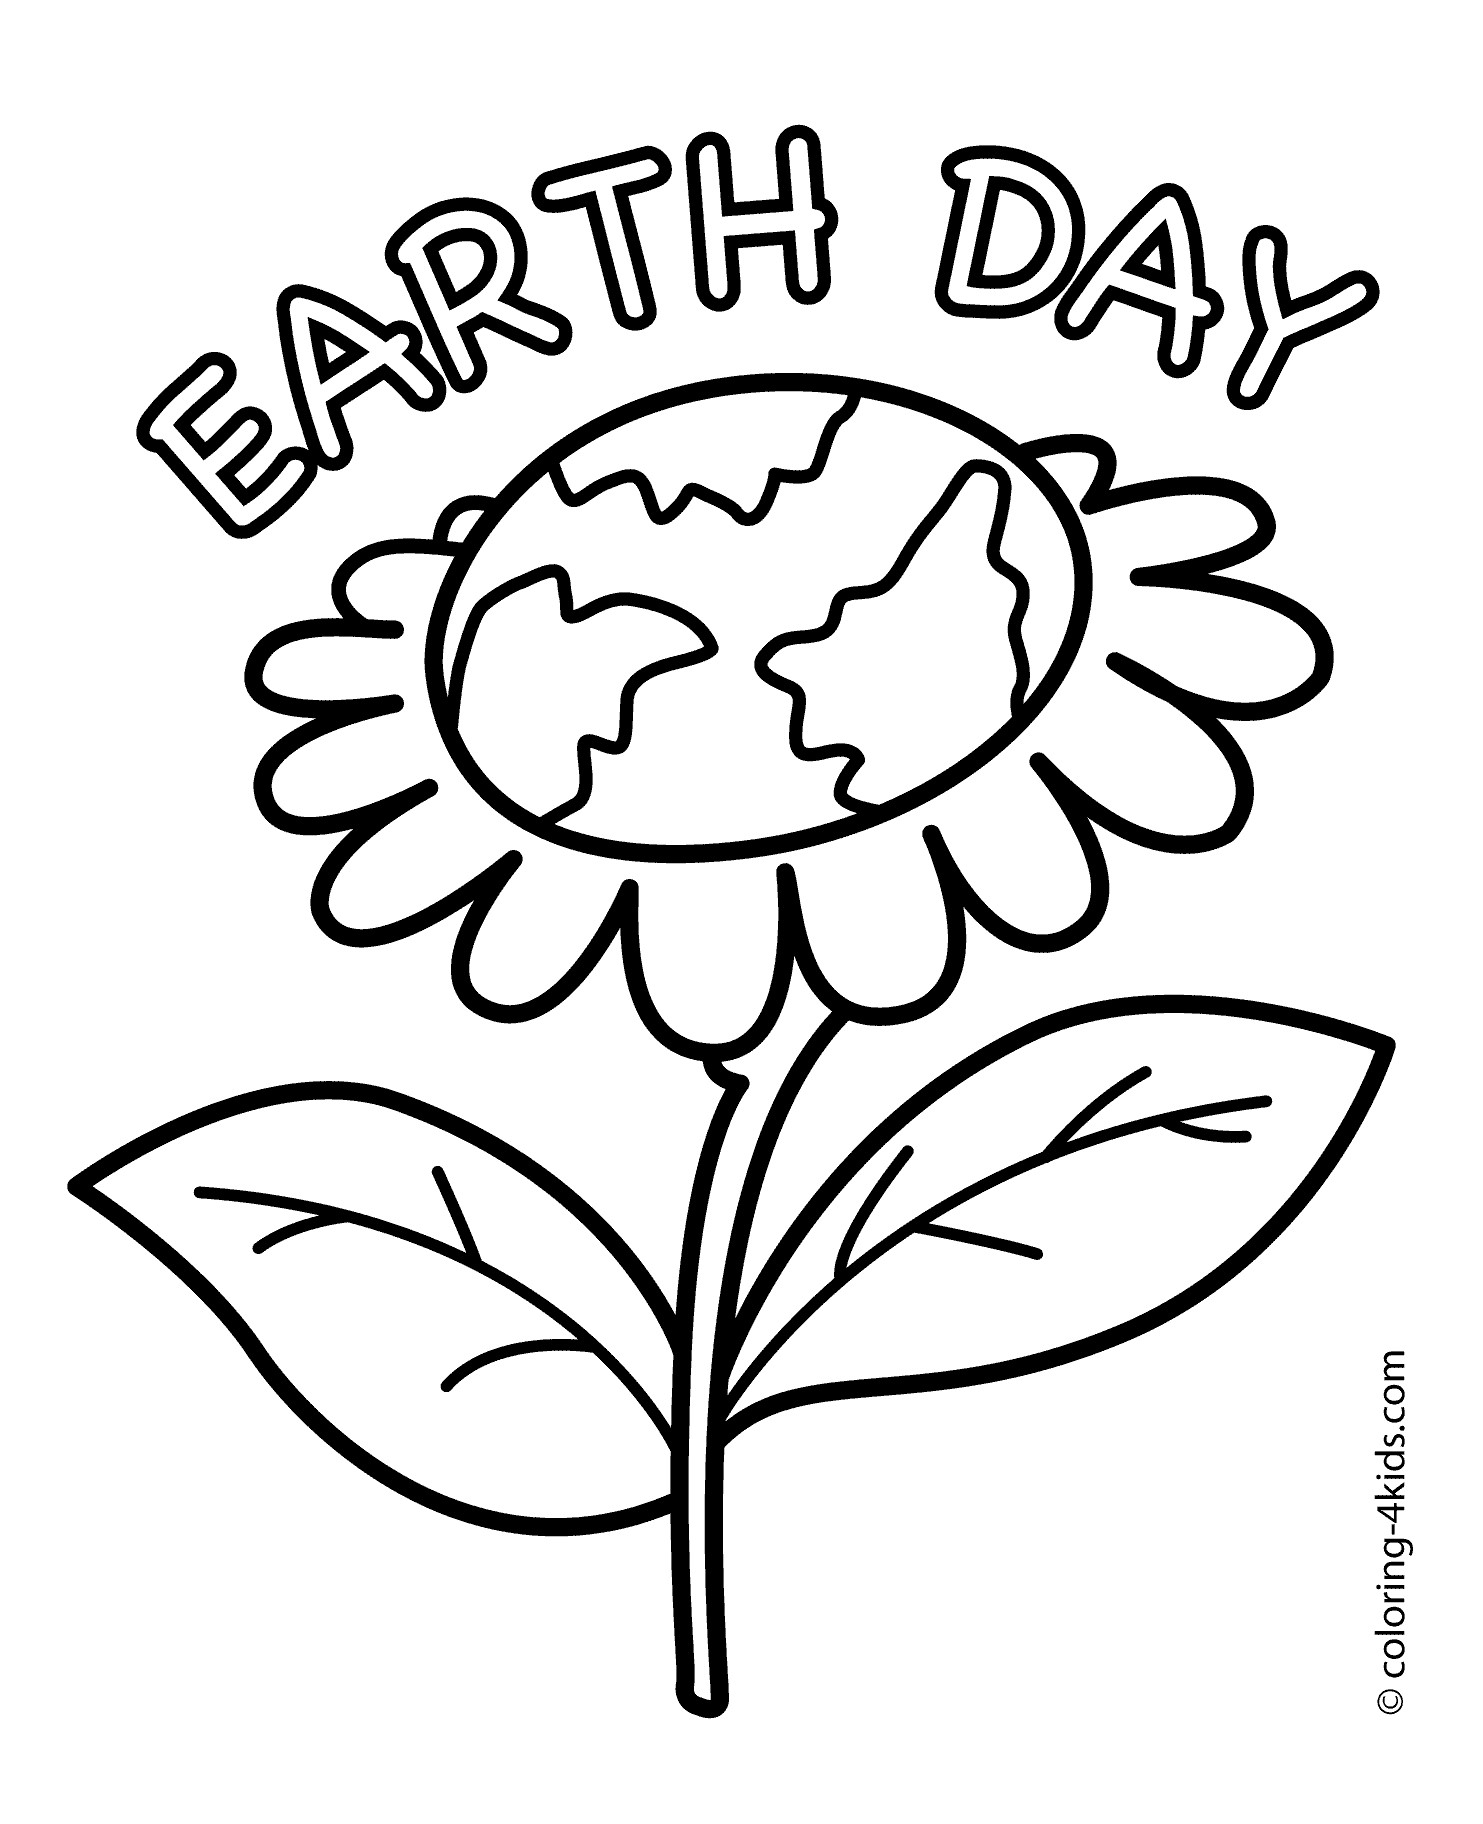 Earth Day Coloring Pages Kindergarten at GetColorings.com   Free ...